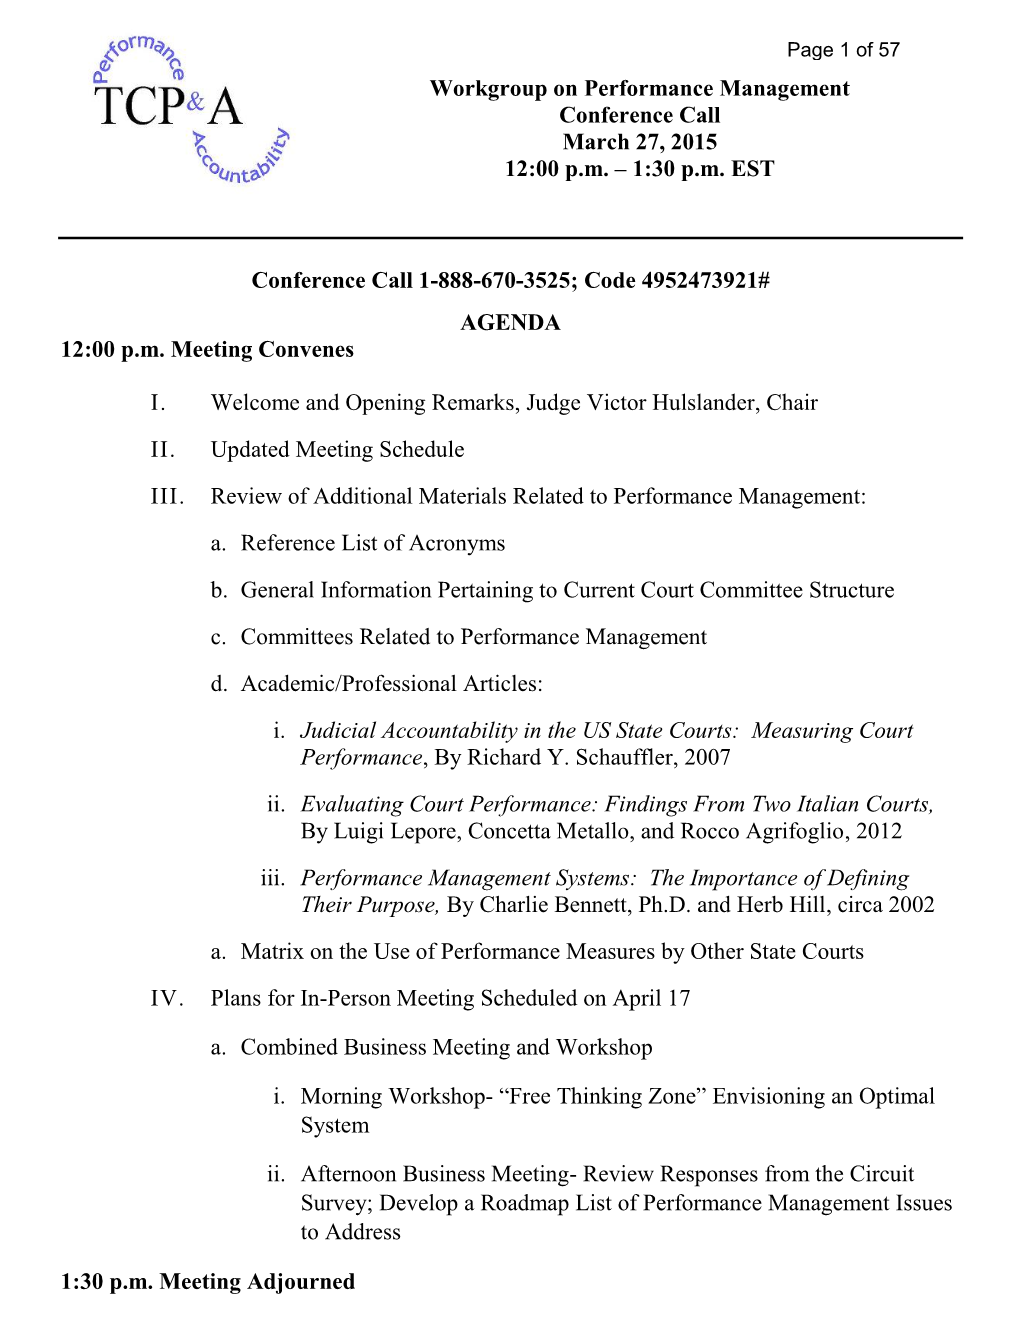 Workgroup on Performance Management Conference Call March 27, 2015 12:00 Pm